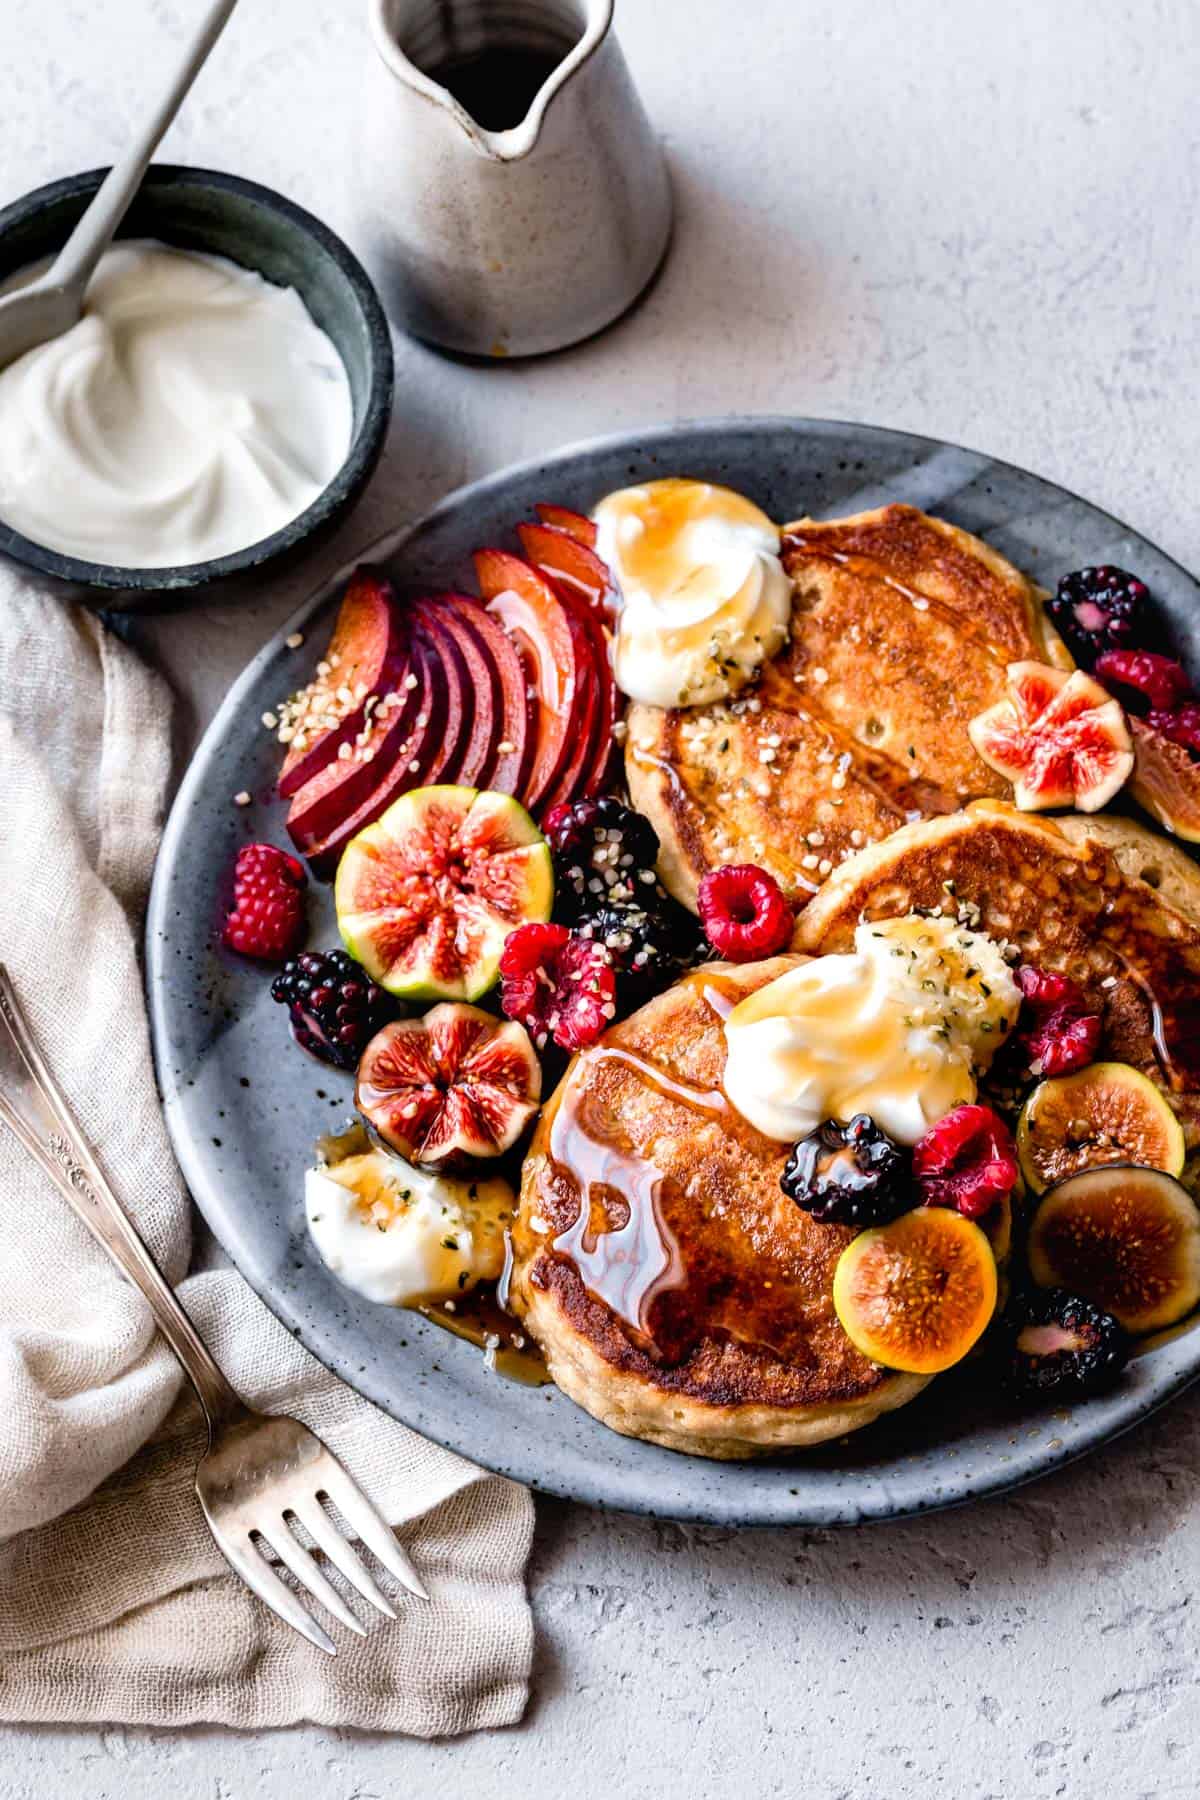 Homemade Gluten-Free Pancakes on a plate (sugar-free and with dairy-free, egg-free, and vegan options)